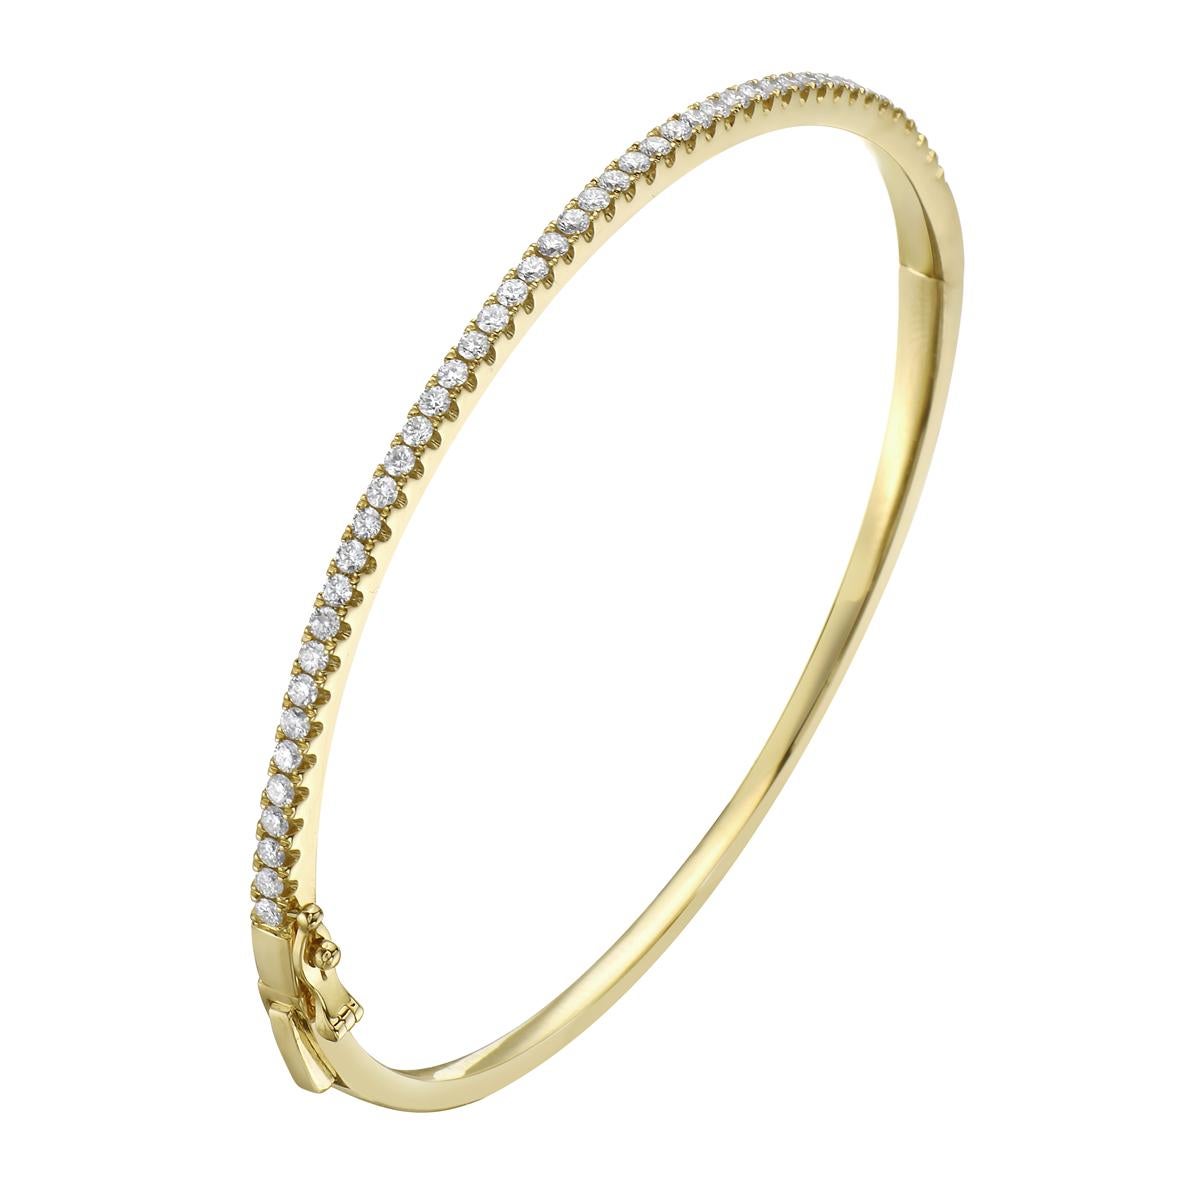 Fashion and glam are at the forefront with this exquisite diamond bangle. This 14-karat yellow gold bangle is made from 10.3 grams of gold. The top is adorned with one row of SI1-0SI2, GH color diamonds made out of 45 round diamonds totaling 0.92